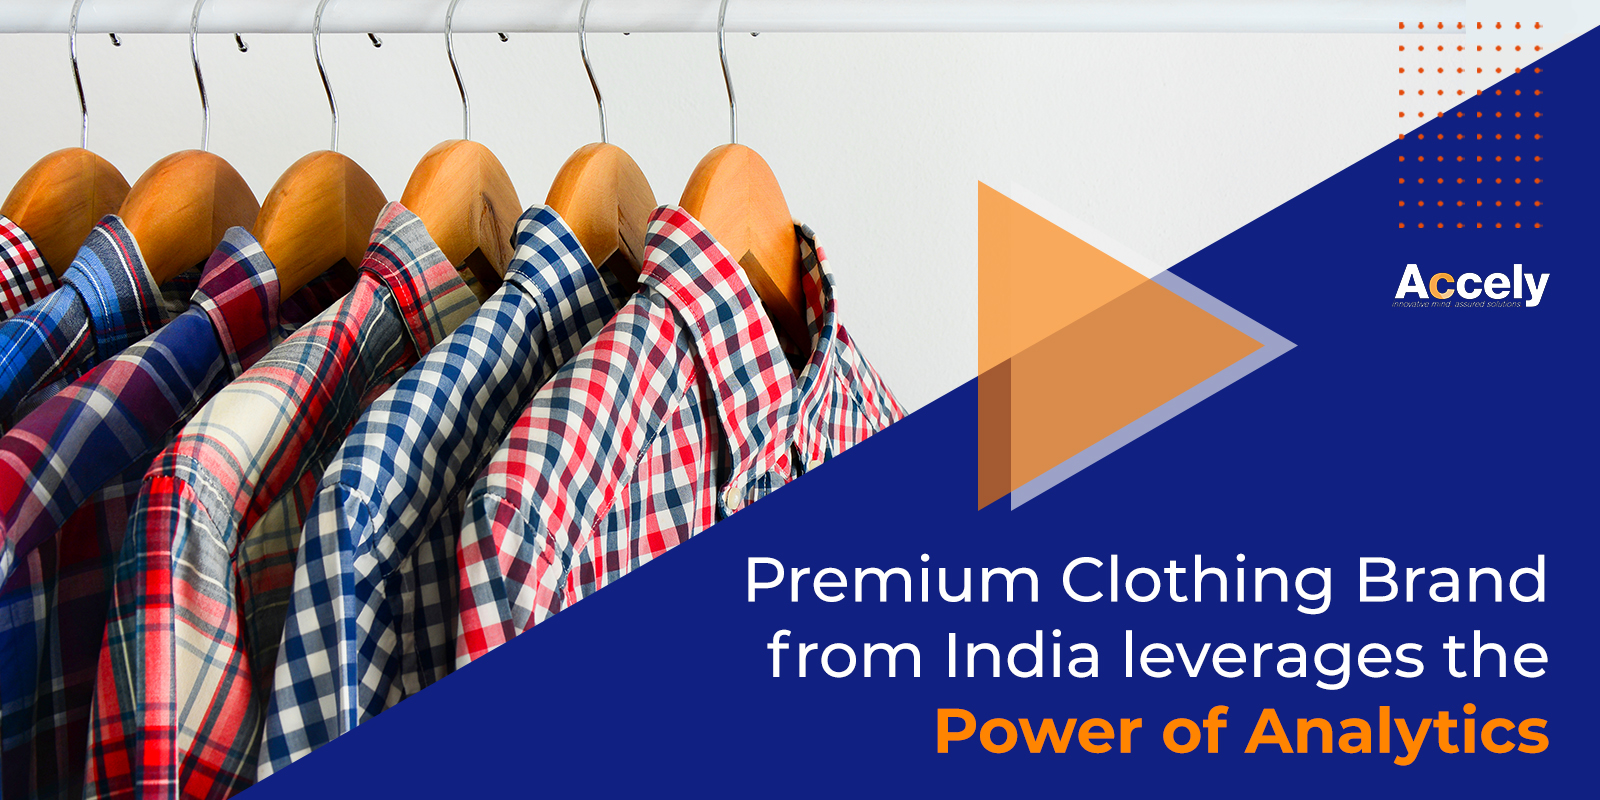 Premium Clothing Brand from India Leverages the Power of Analytics